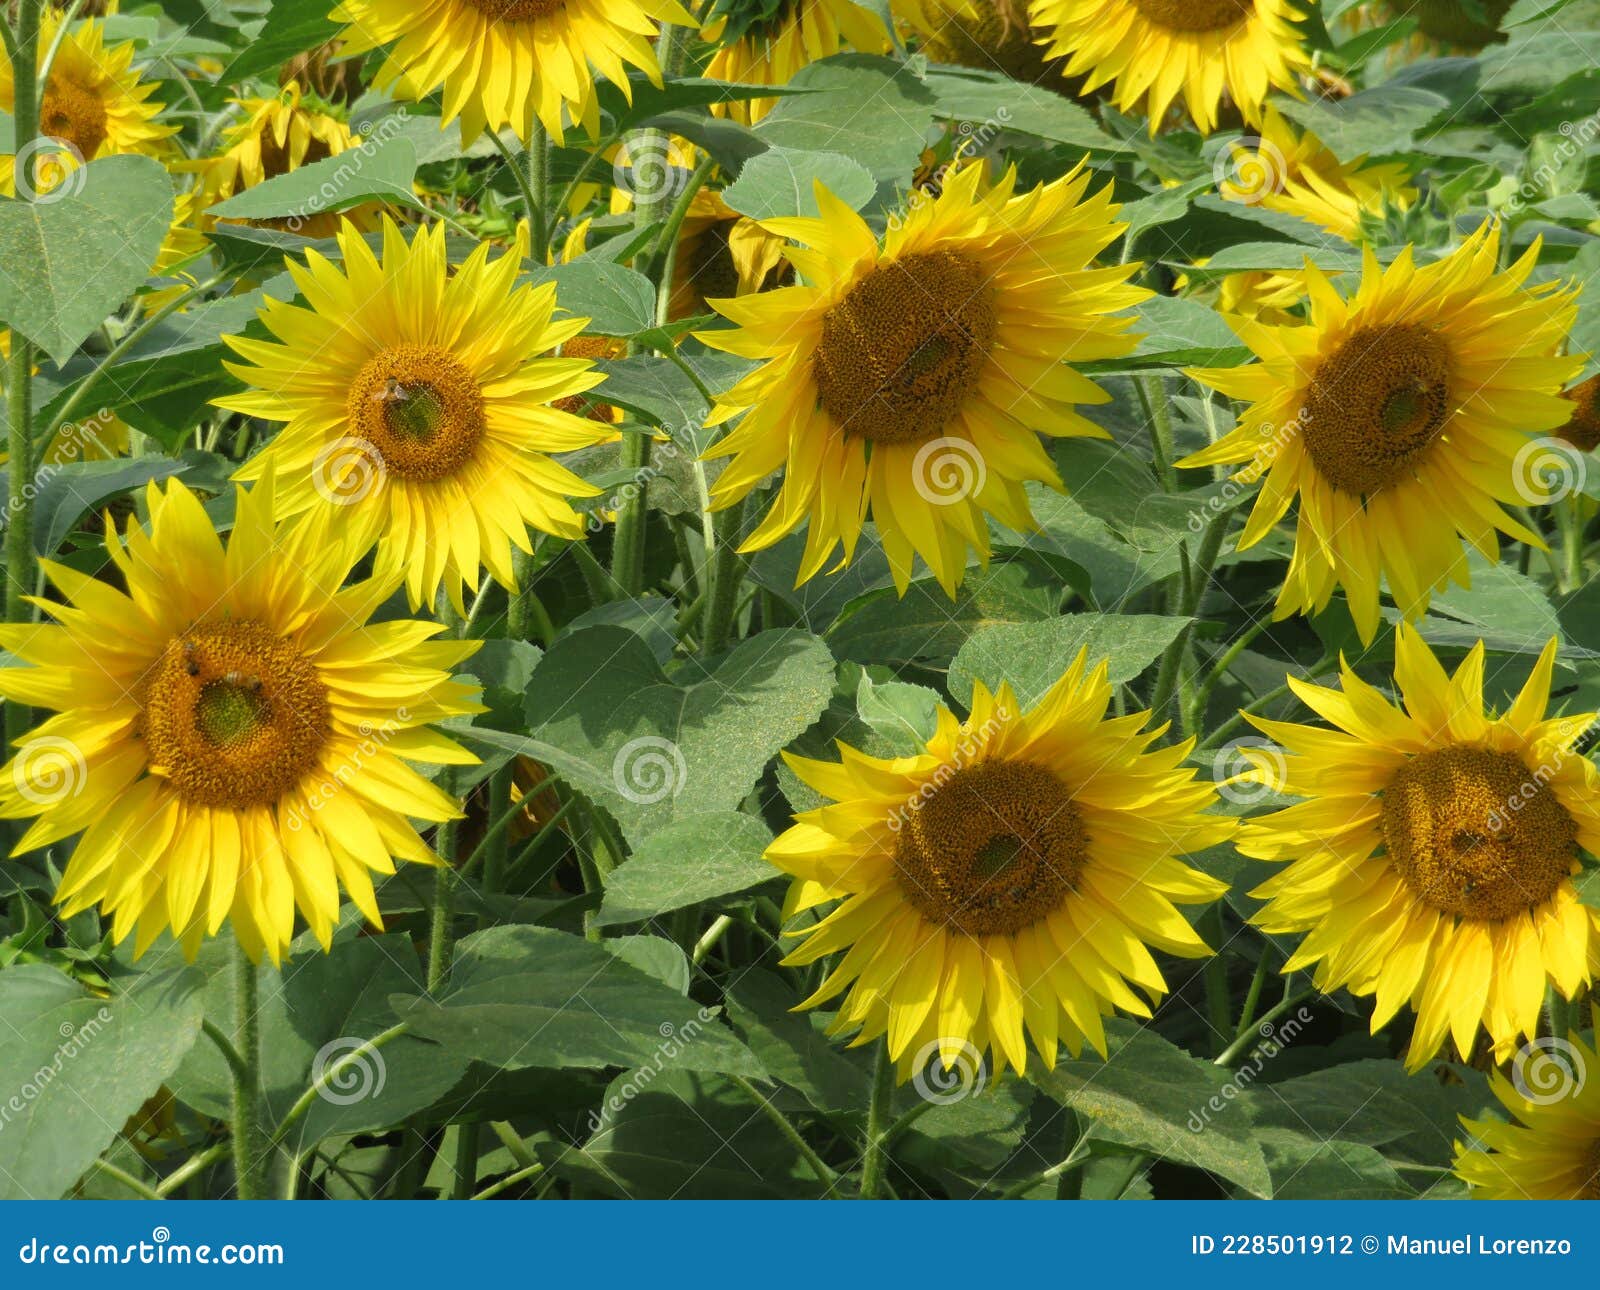 beautiful sunflower flowers large yellow insects petals pollen